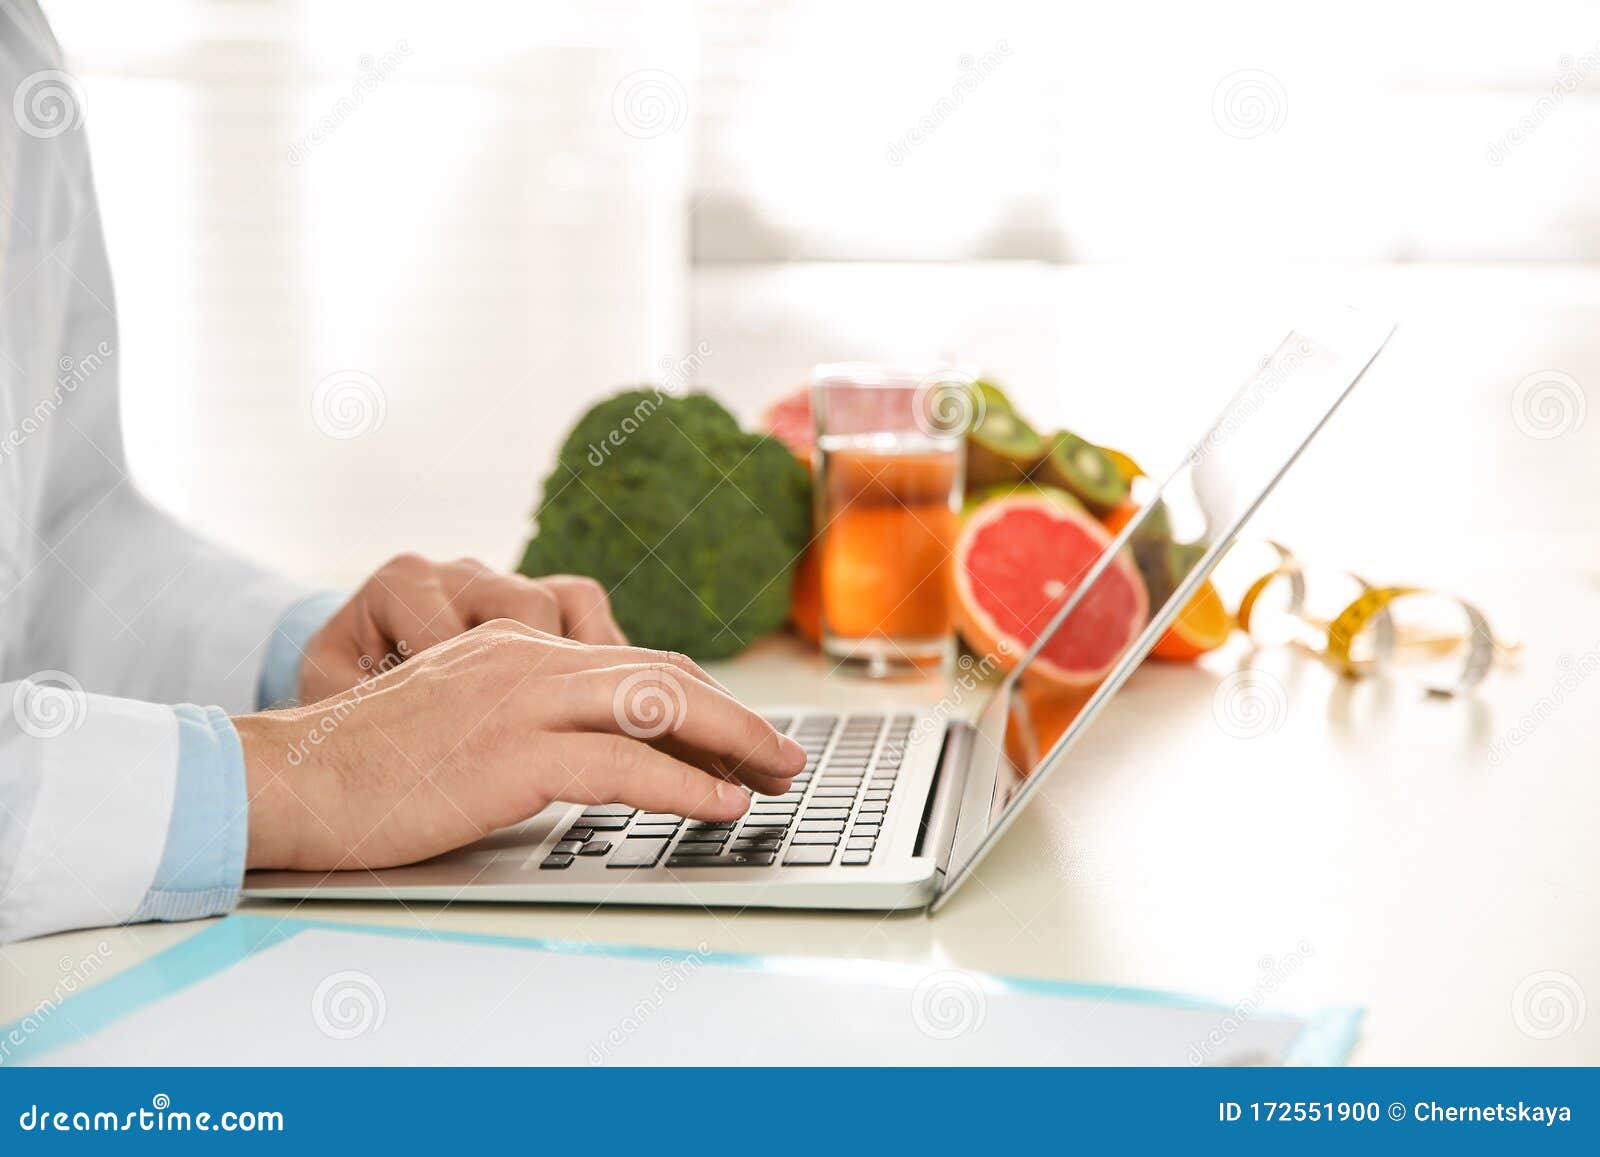 nutritionist working with laptop at desk in office